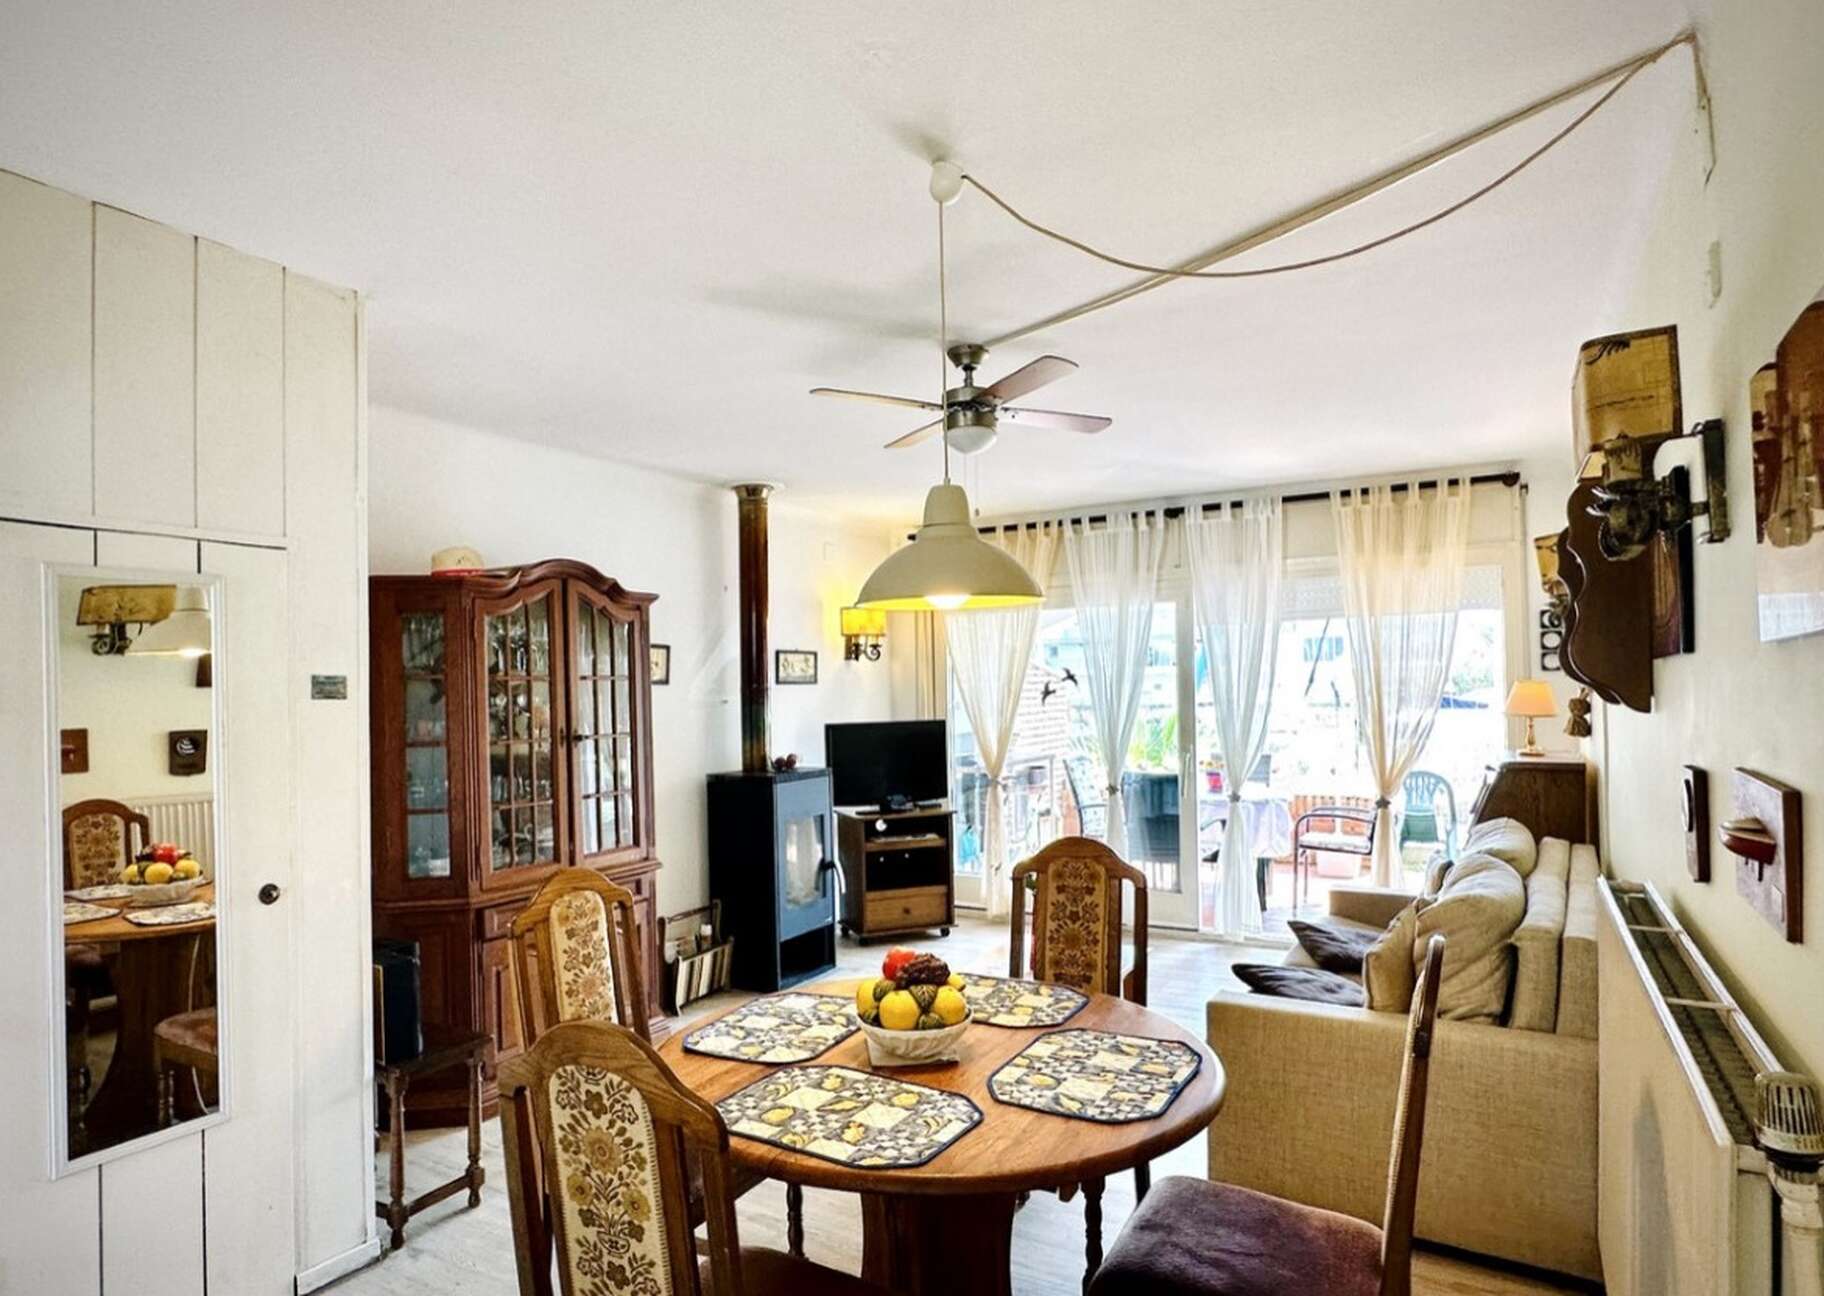 Fisherman-style house with sailboat mooring for sale in Empuriabrava